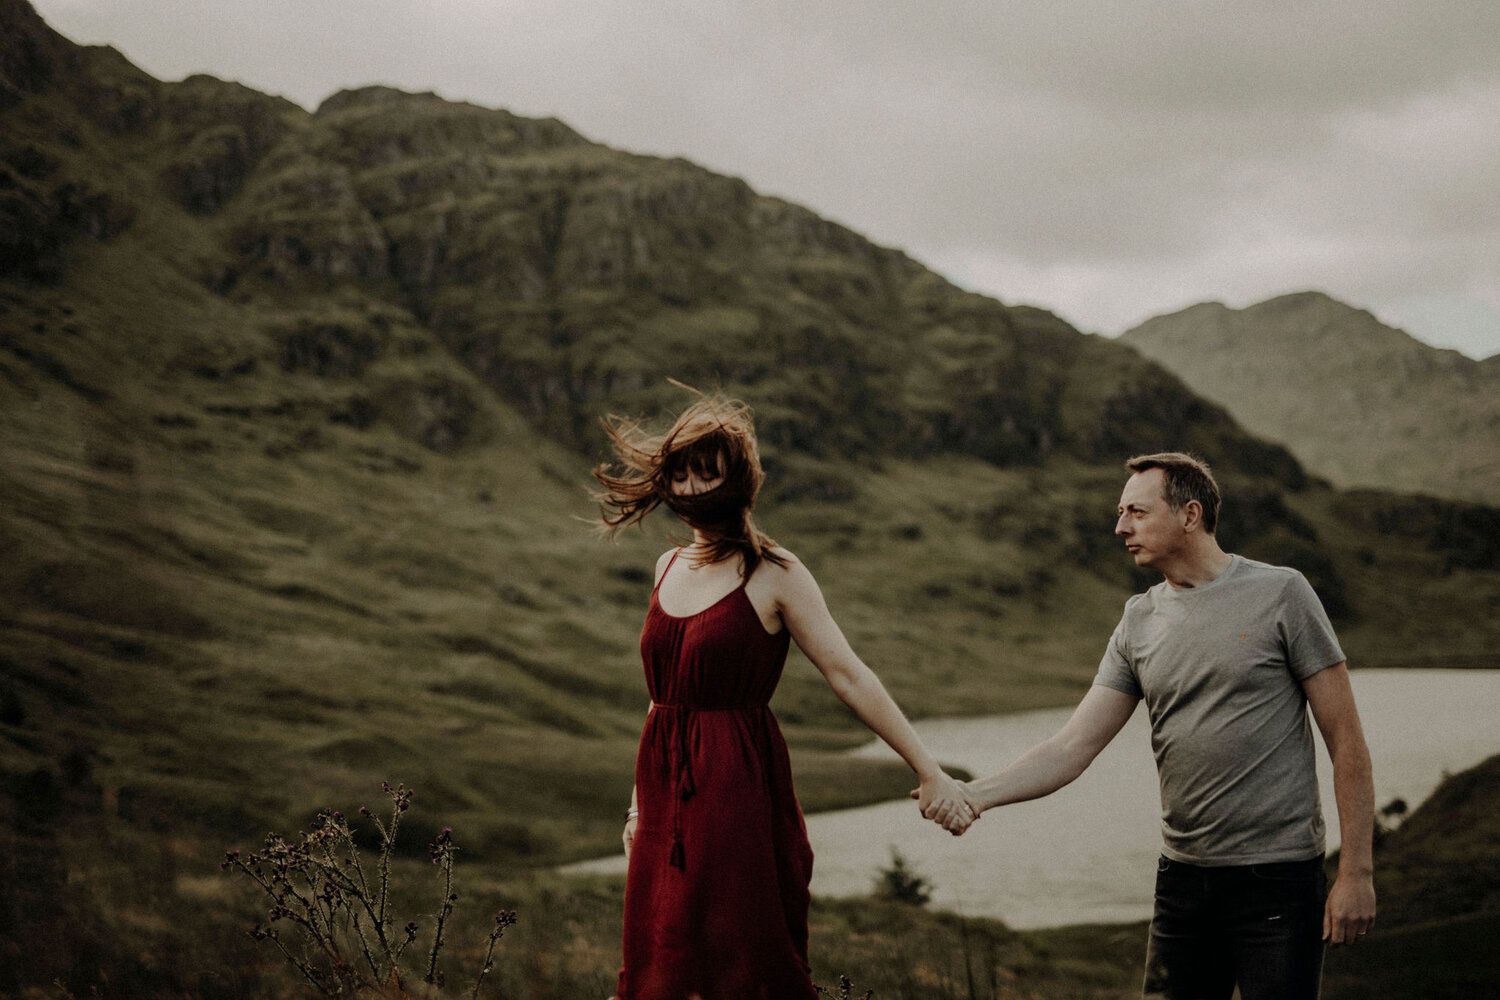  woman and man holding their hands wind blowing hair in mountains with a lake behind 